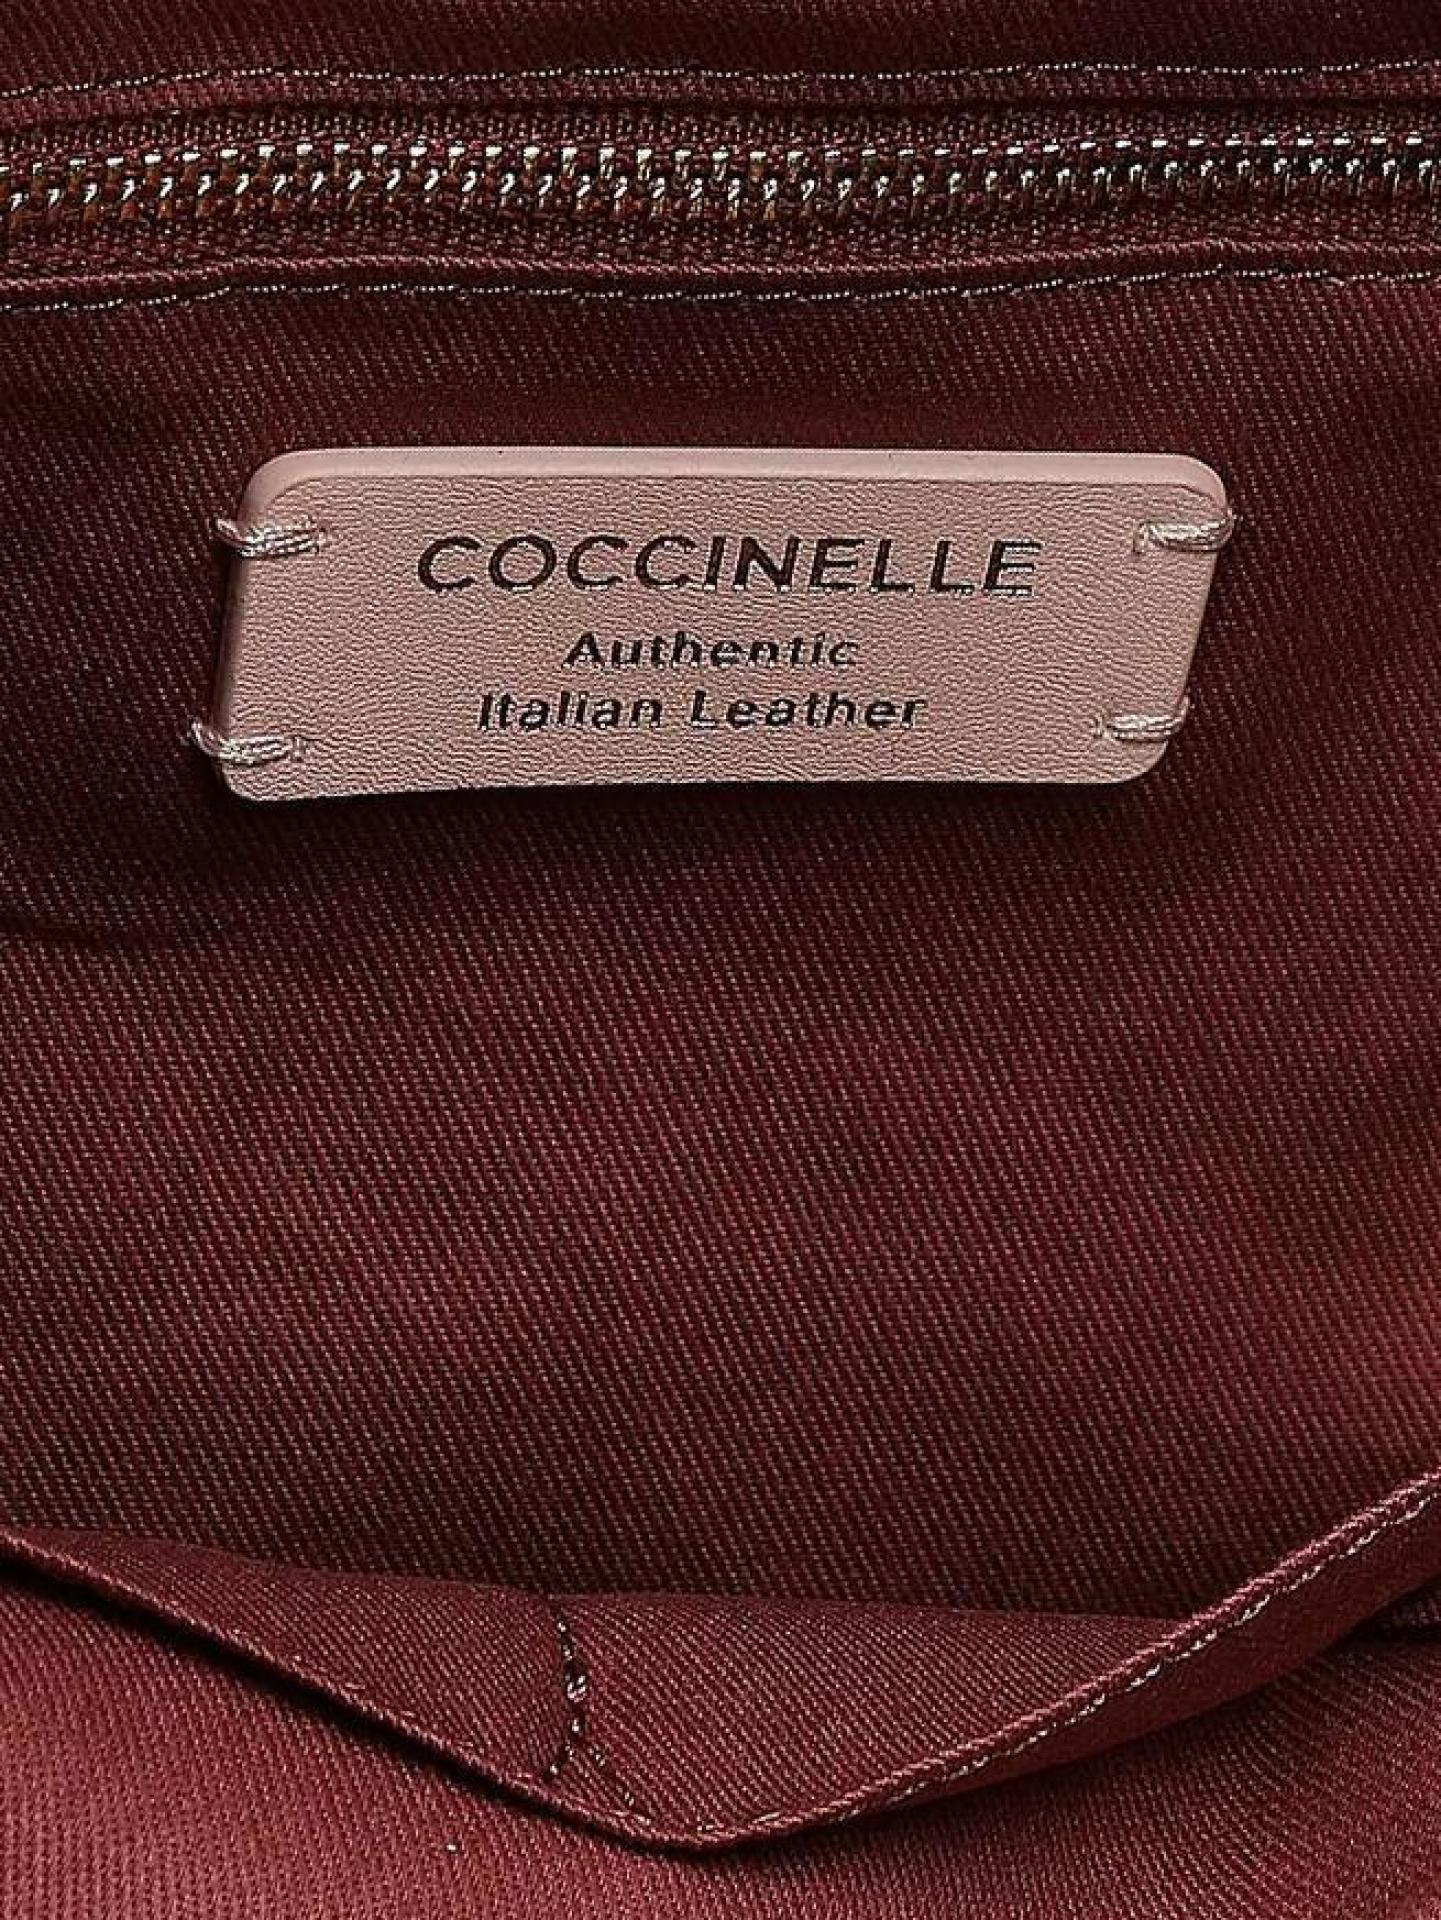 Coccinelle HANDBAG GRAINED LEATHER / COFFEE